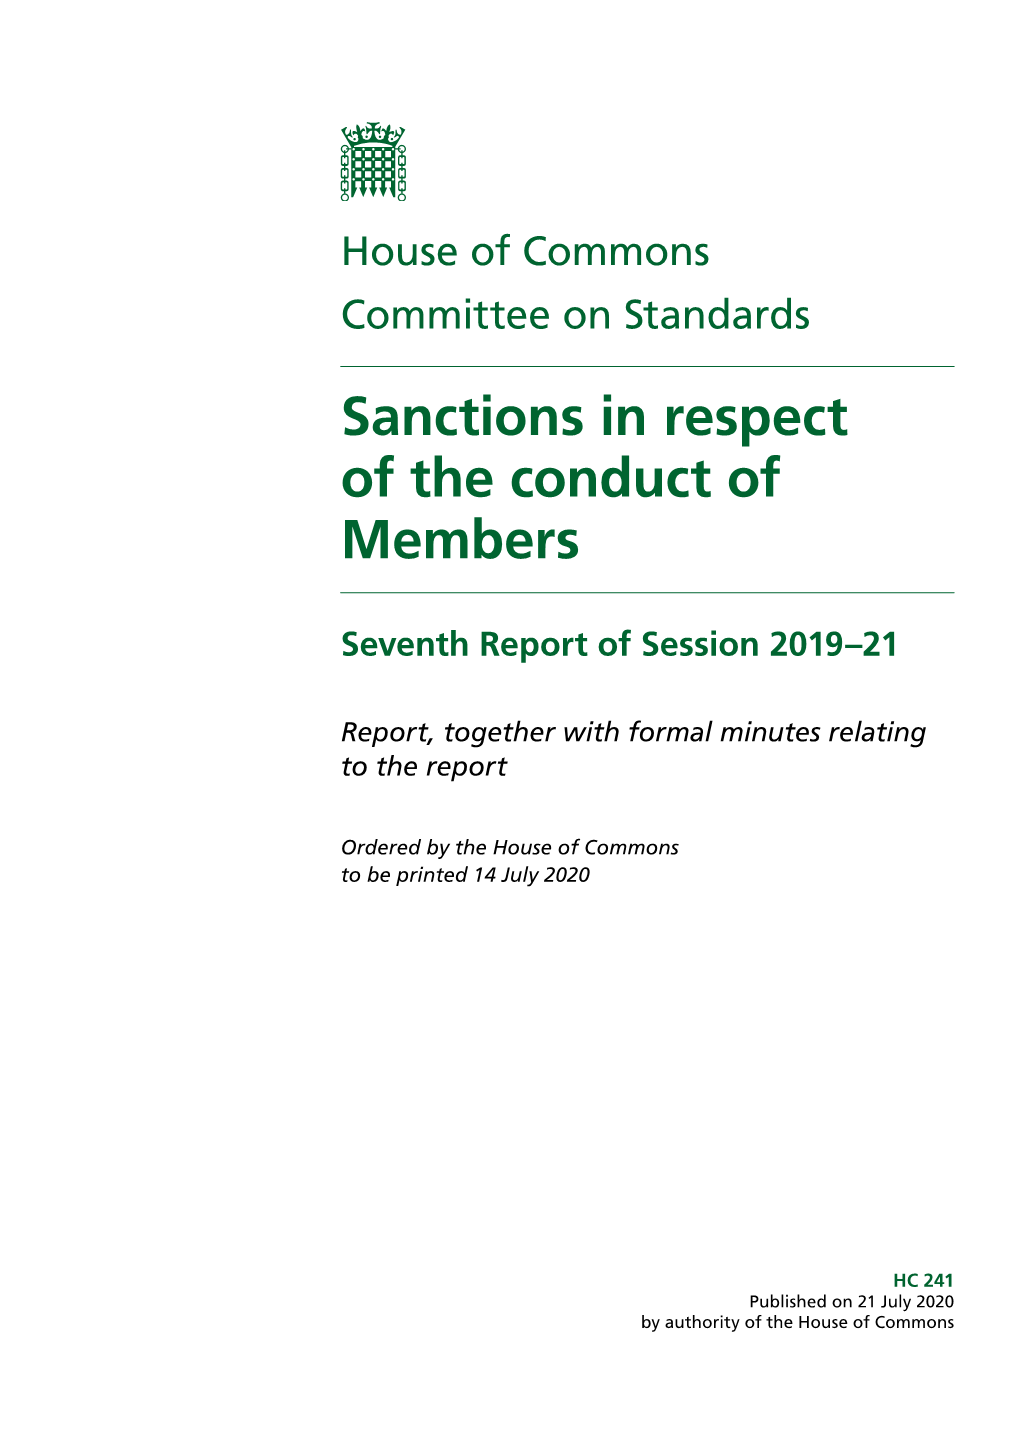 Sanctions in Respect of the Conduct of Members